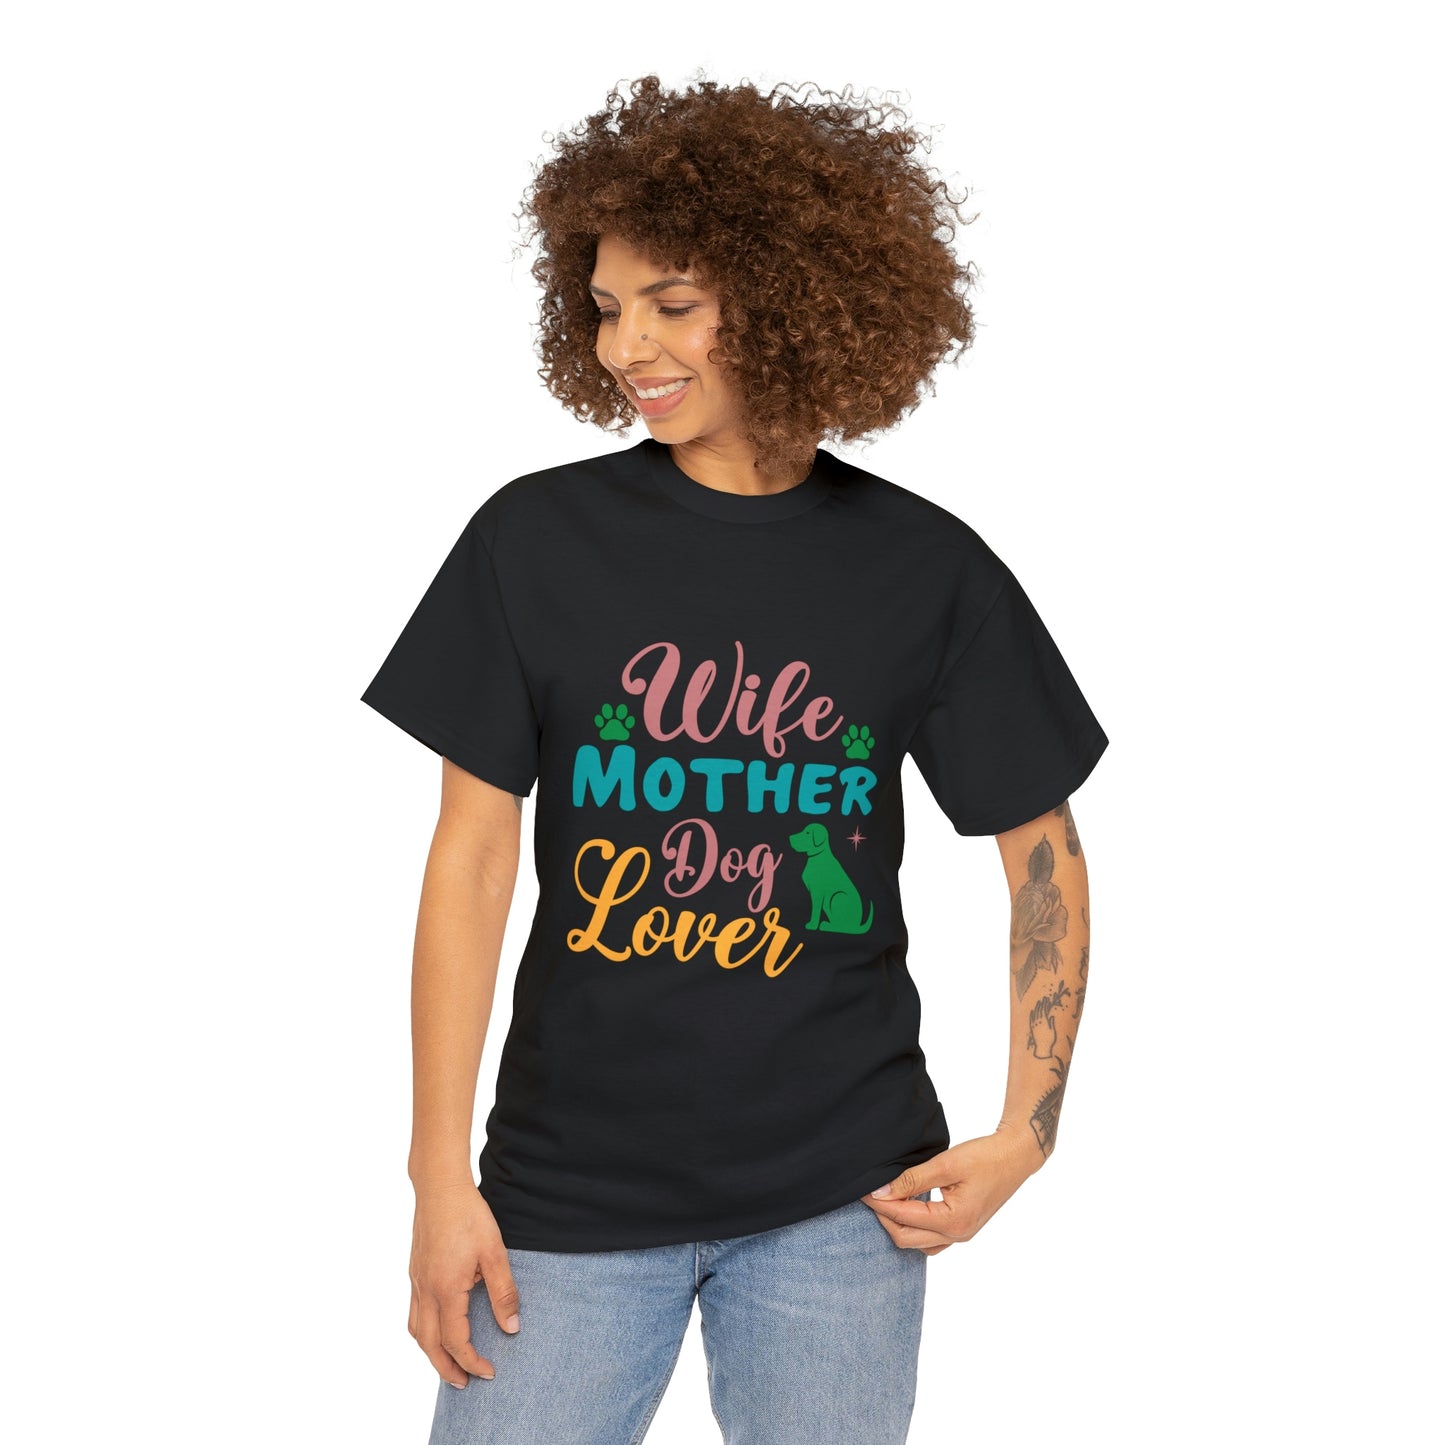 Wife Mother Dog Lover Tee